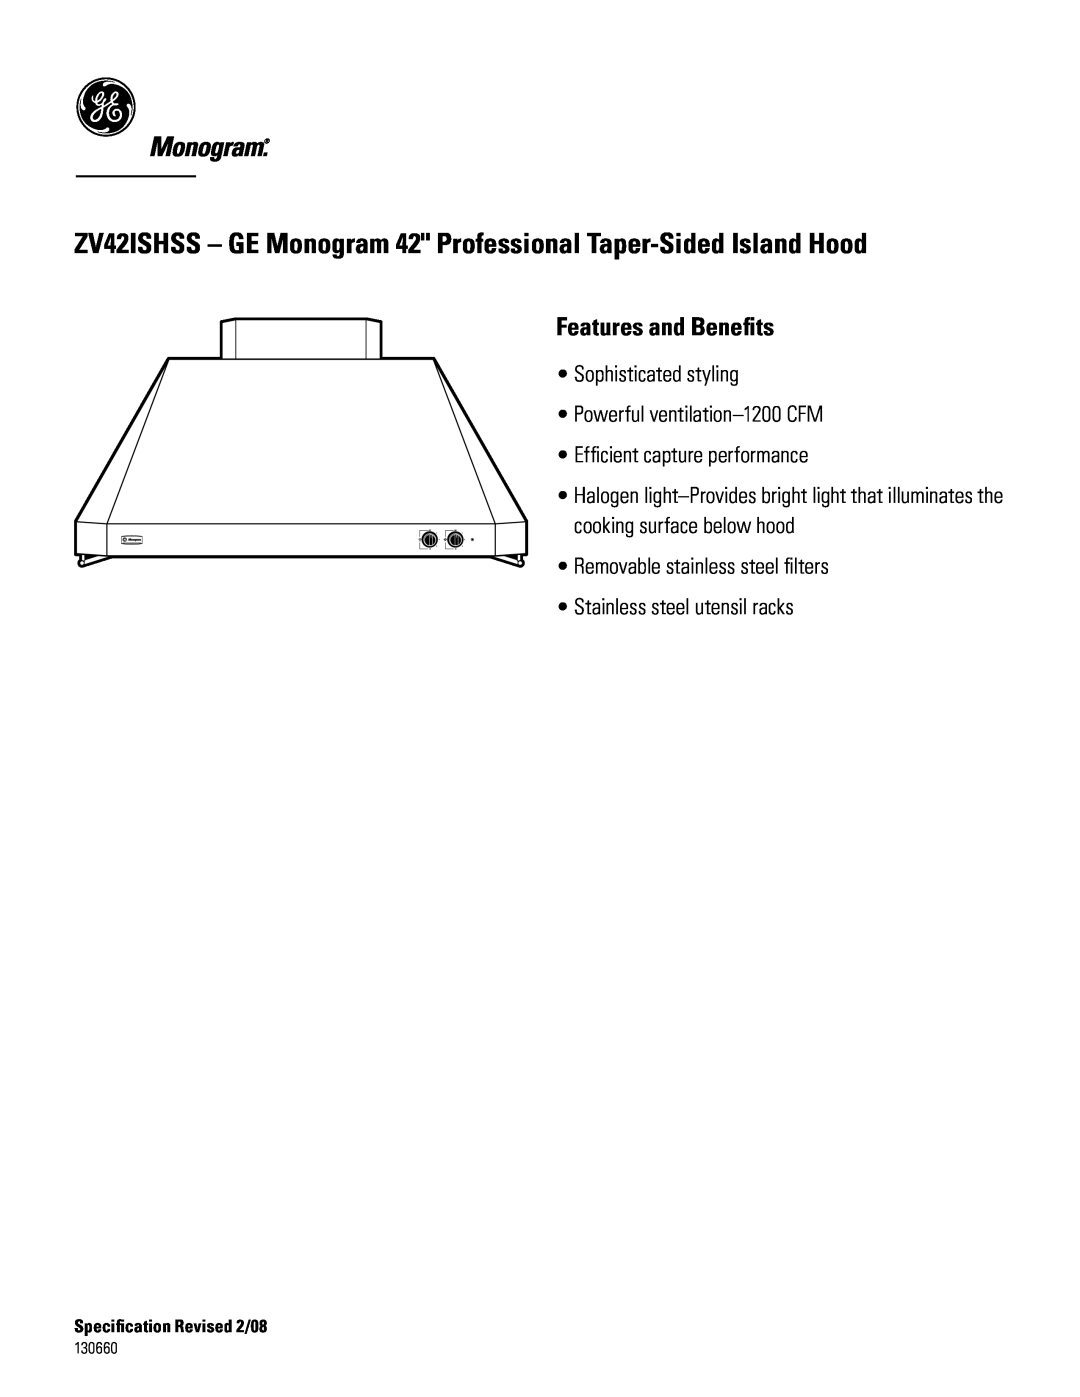 GE Monogram ZX42DC10 zv42ishss - GE Monogram 42 Professional Taper-Sided Island Hood, Features and Benefits, 130660 